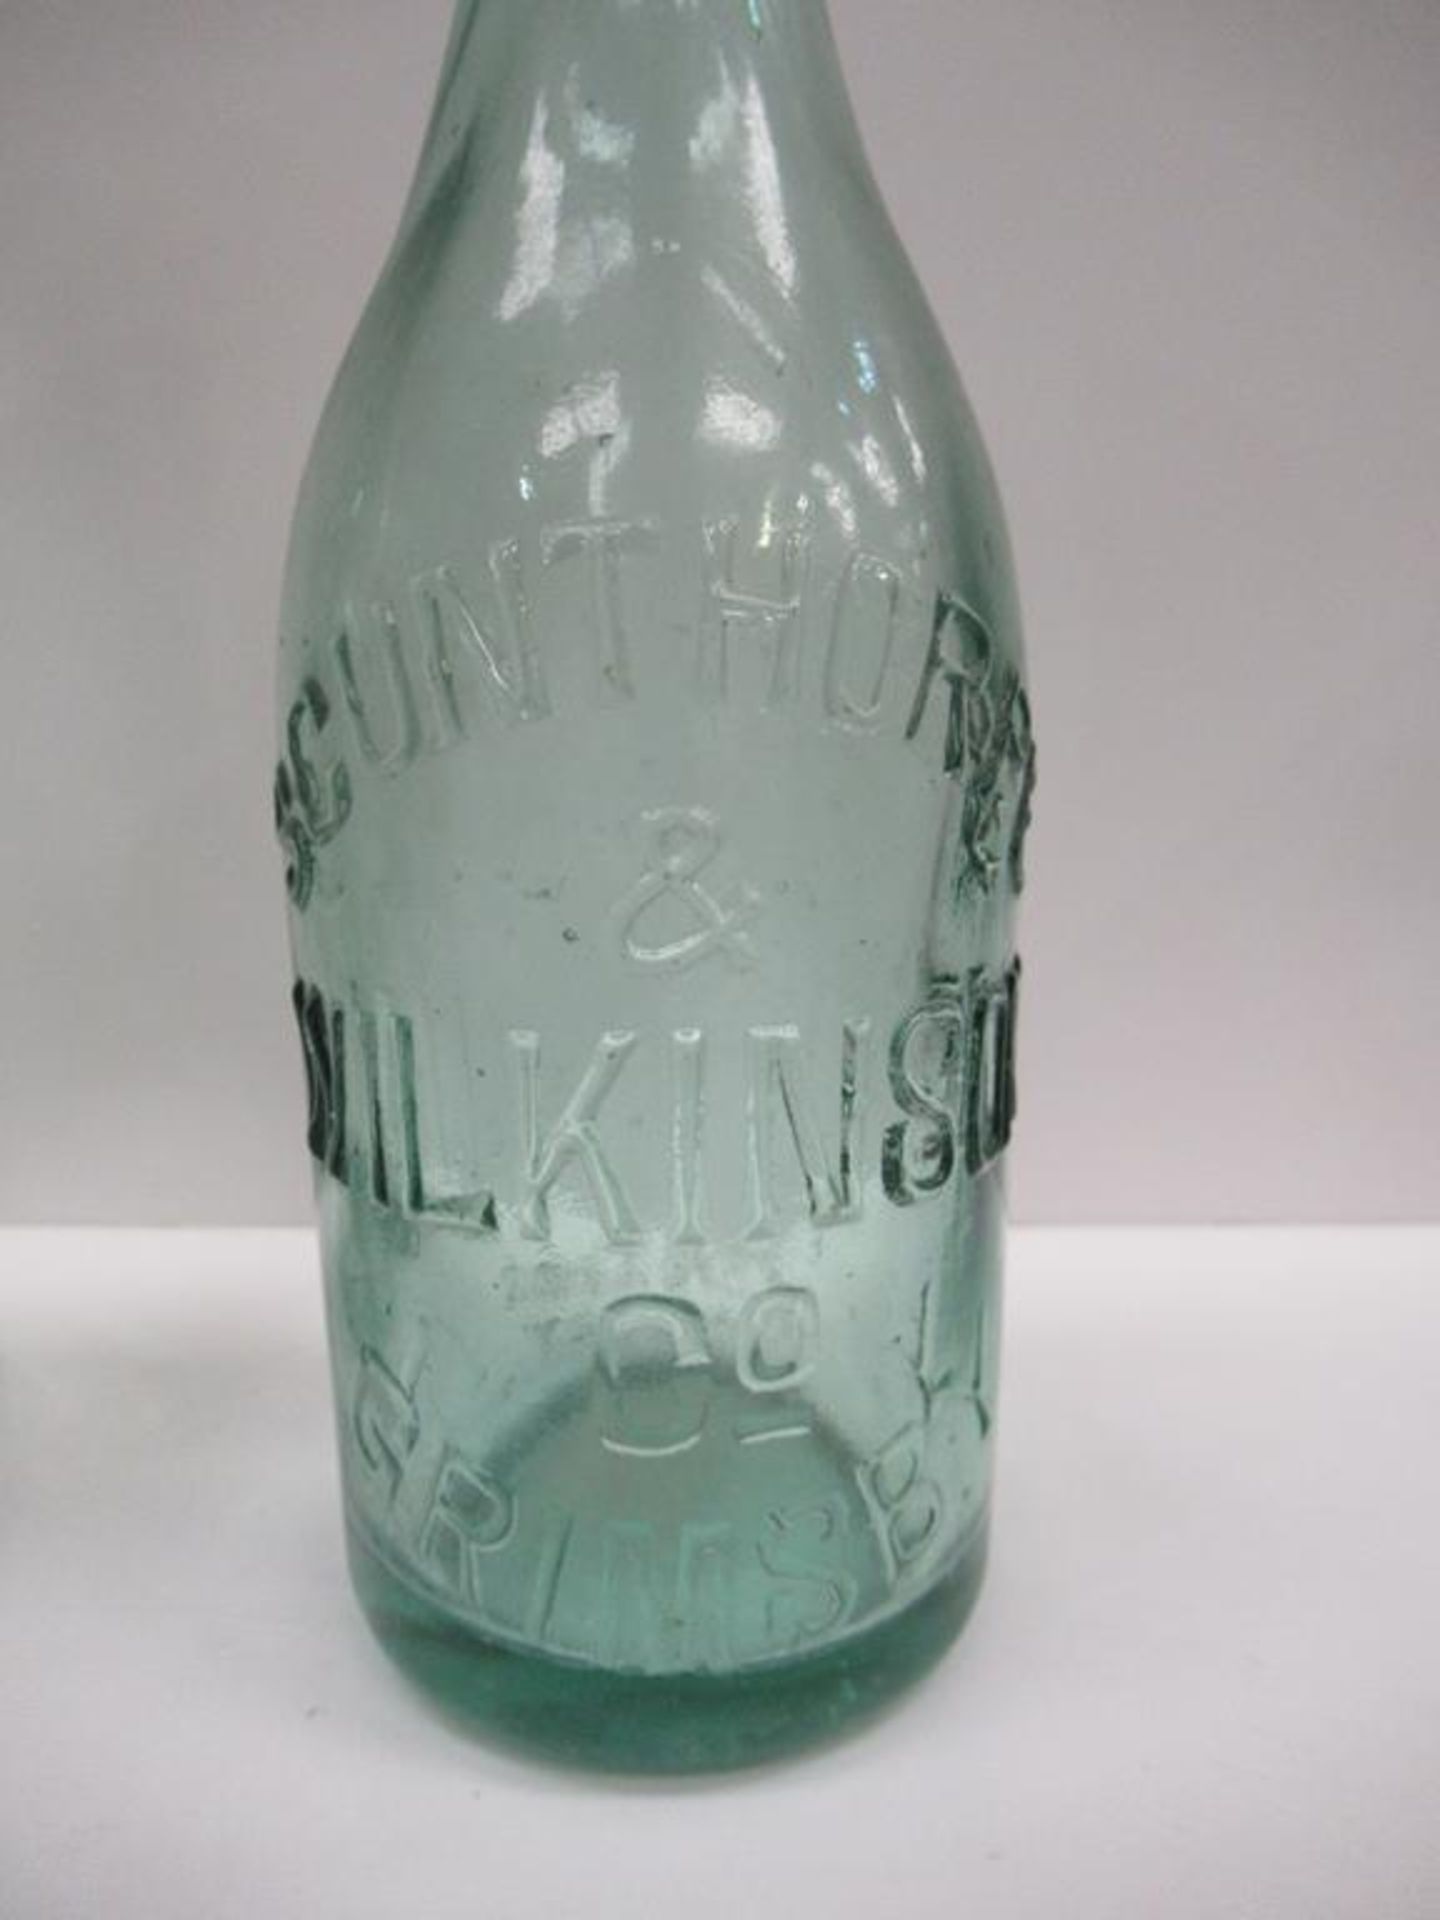 4x Grimsby (3x Scunthorpe) Wilkinsons & Co. bottles - Image 5 of 14